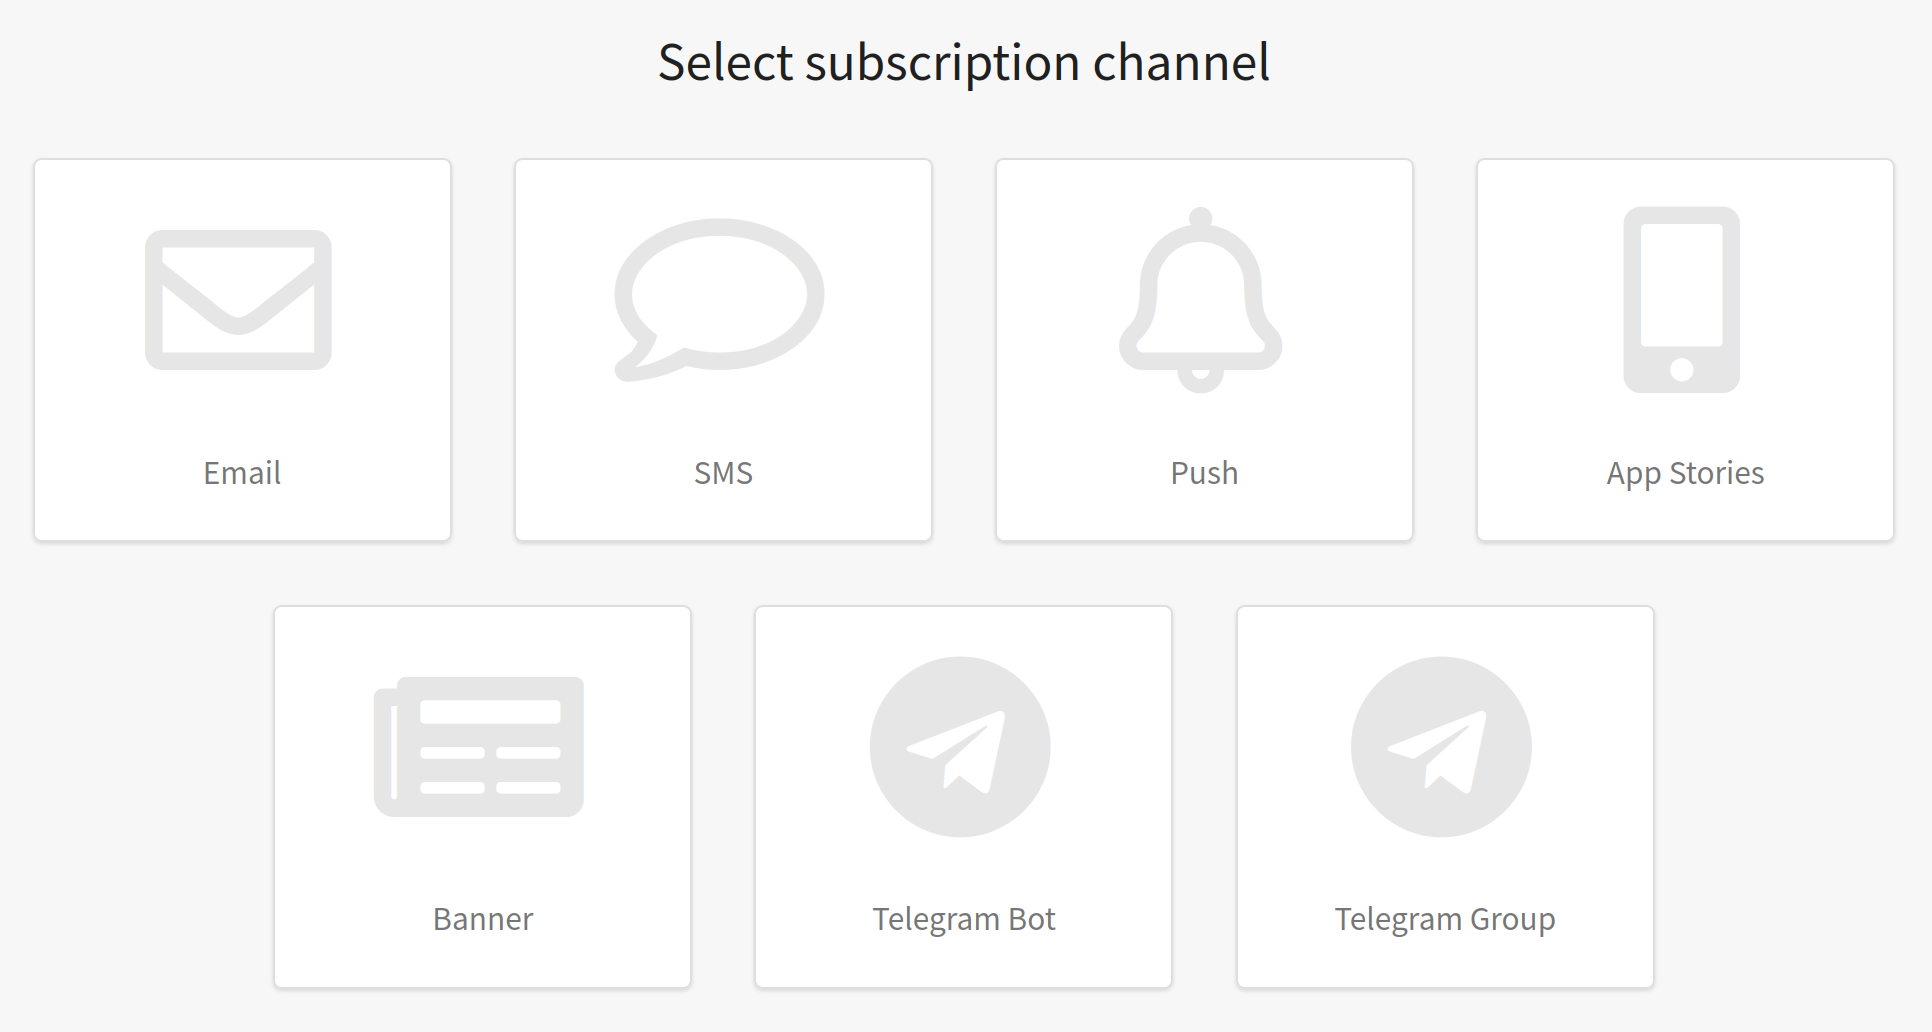 Subscription channel